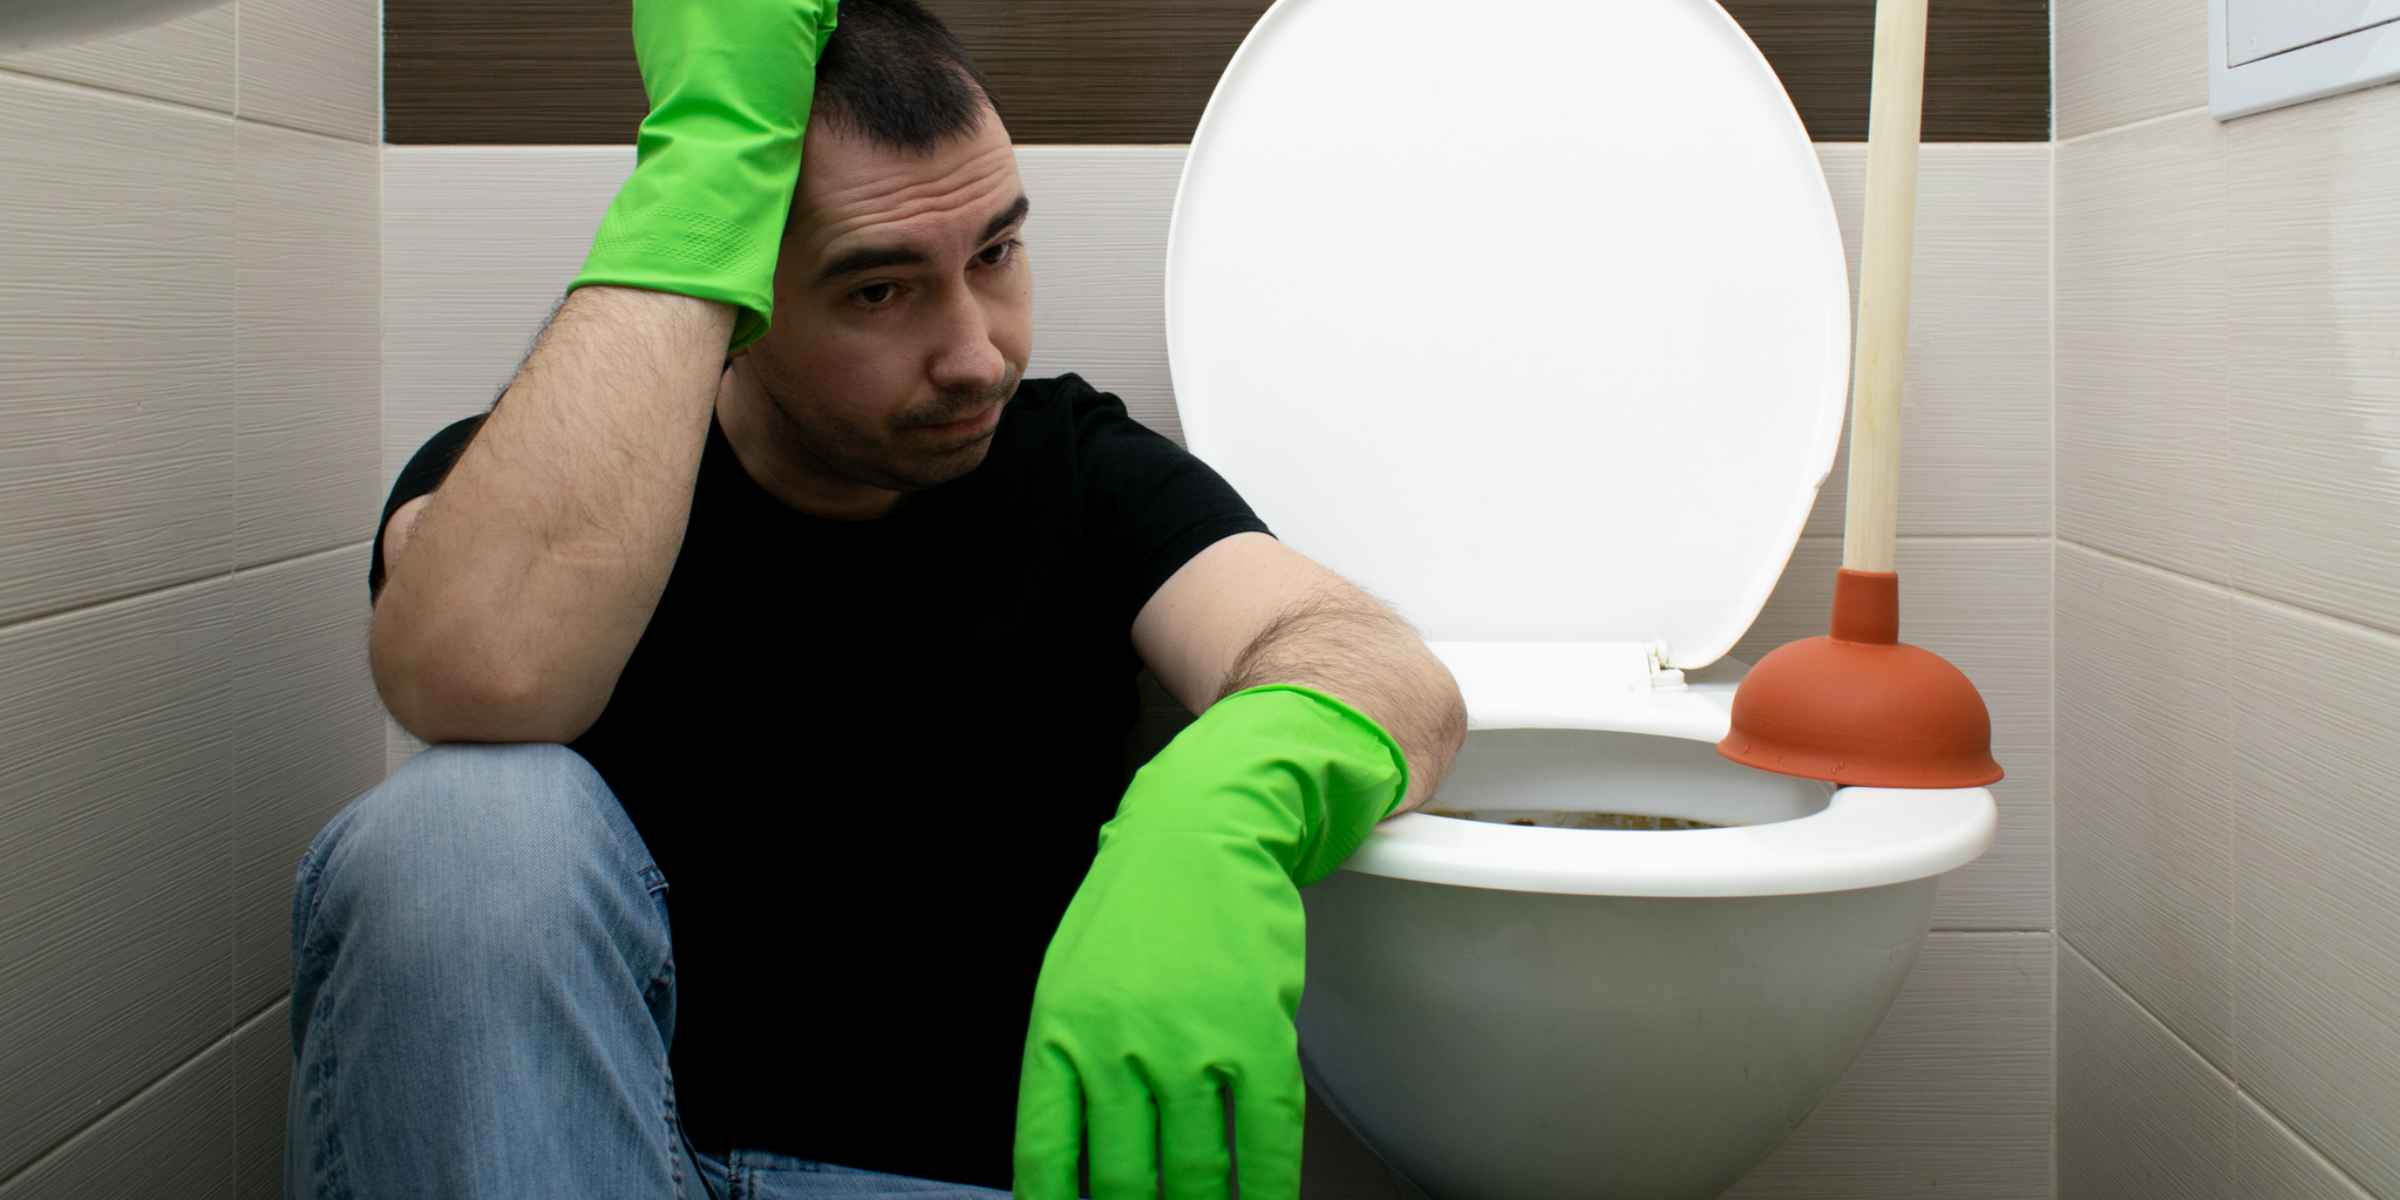 Learn How to Fix a Running or Clogged Toilet with This Step-by-Step Guide